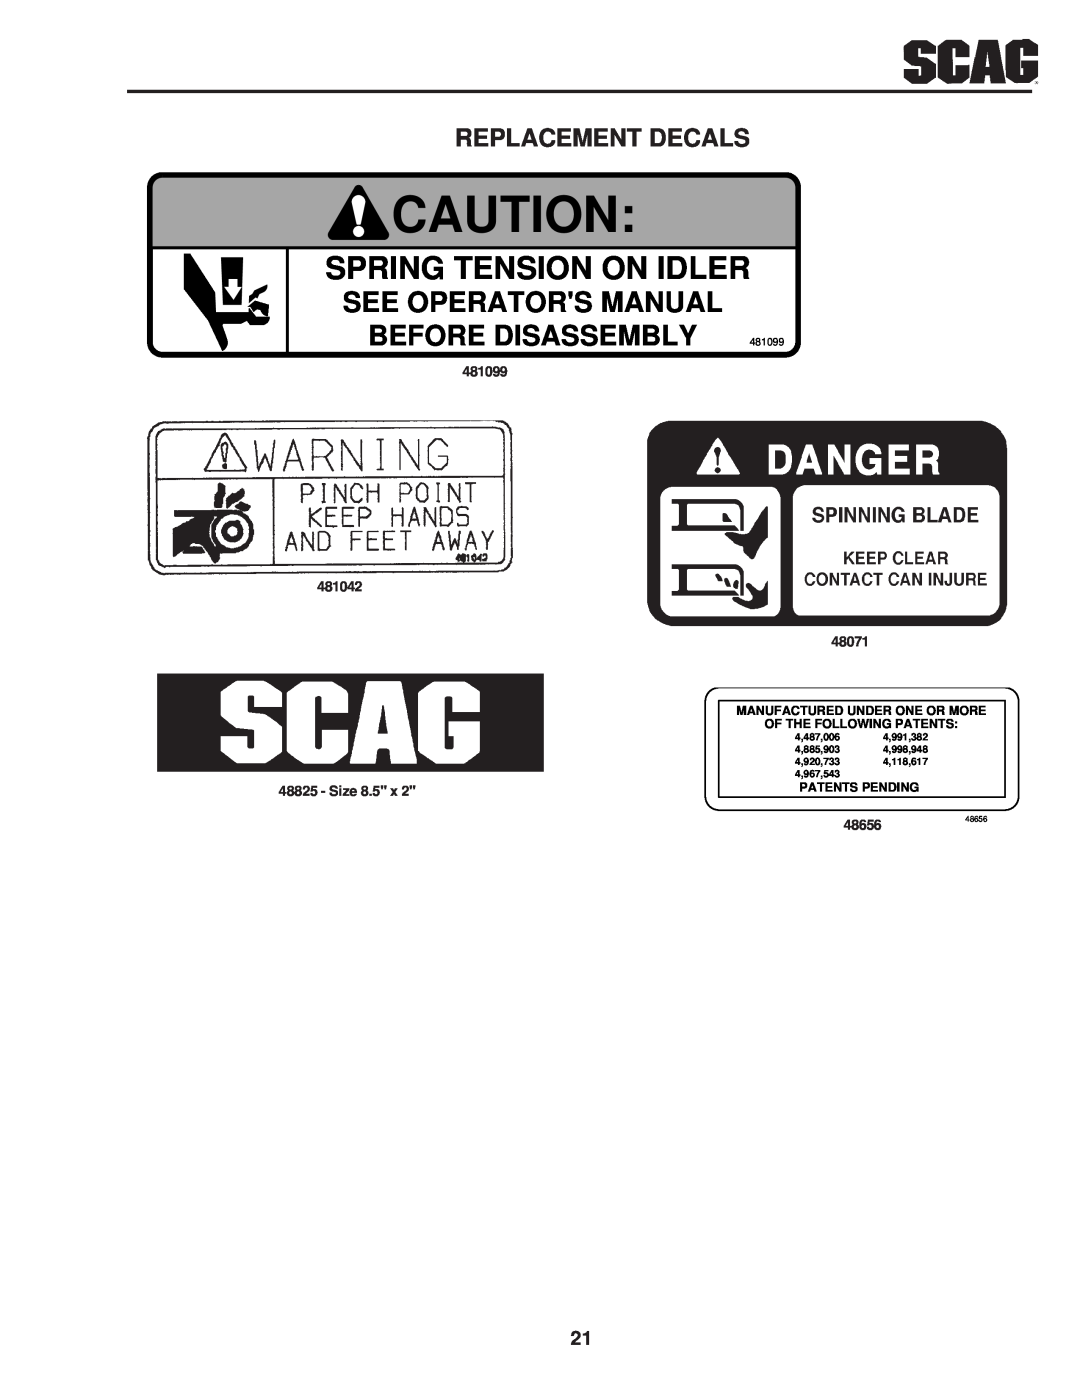 Scag Power Equipment SSZ Spring Tension On Idler, See Operators Manual Before Disassembly, Replacement Decals, 48656 